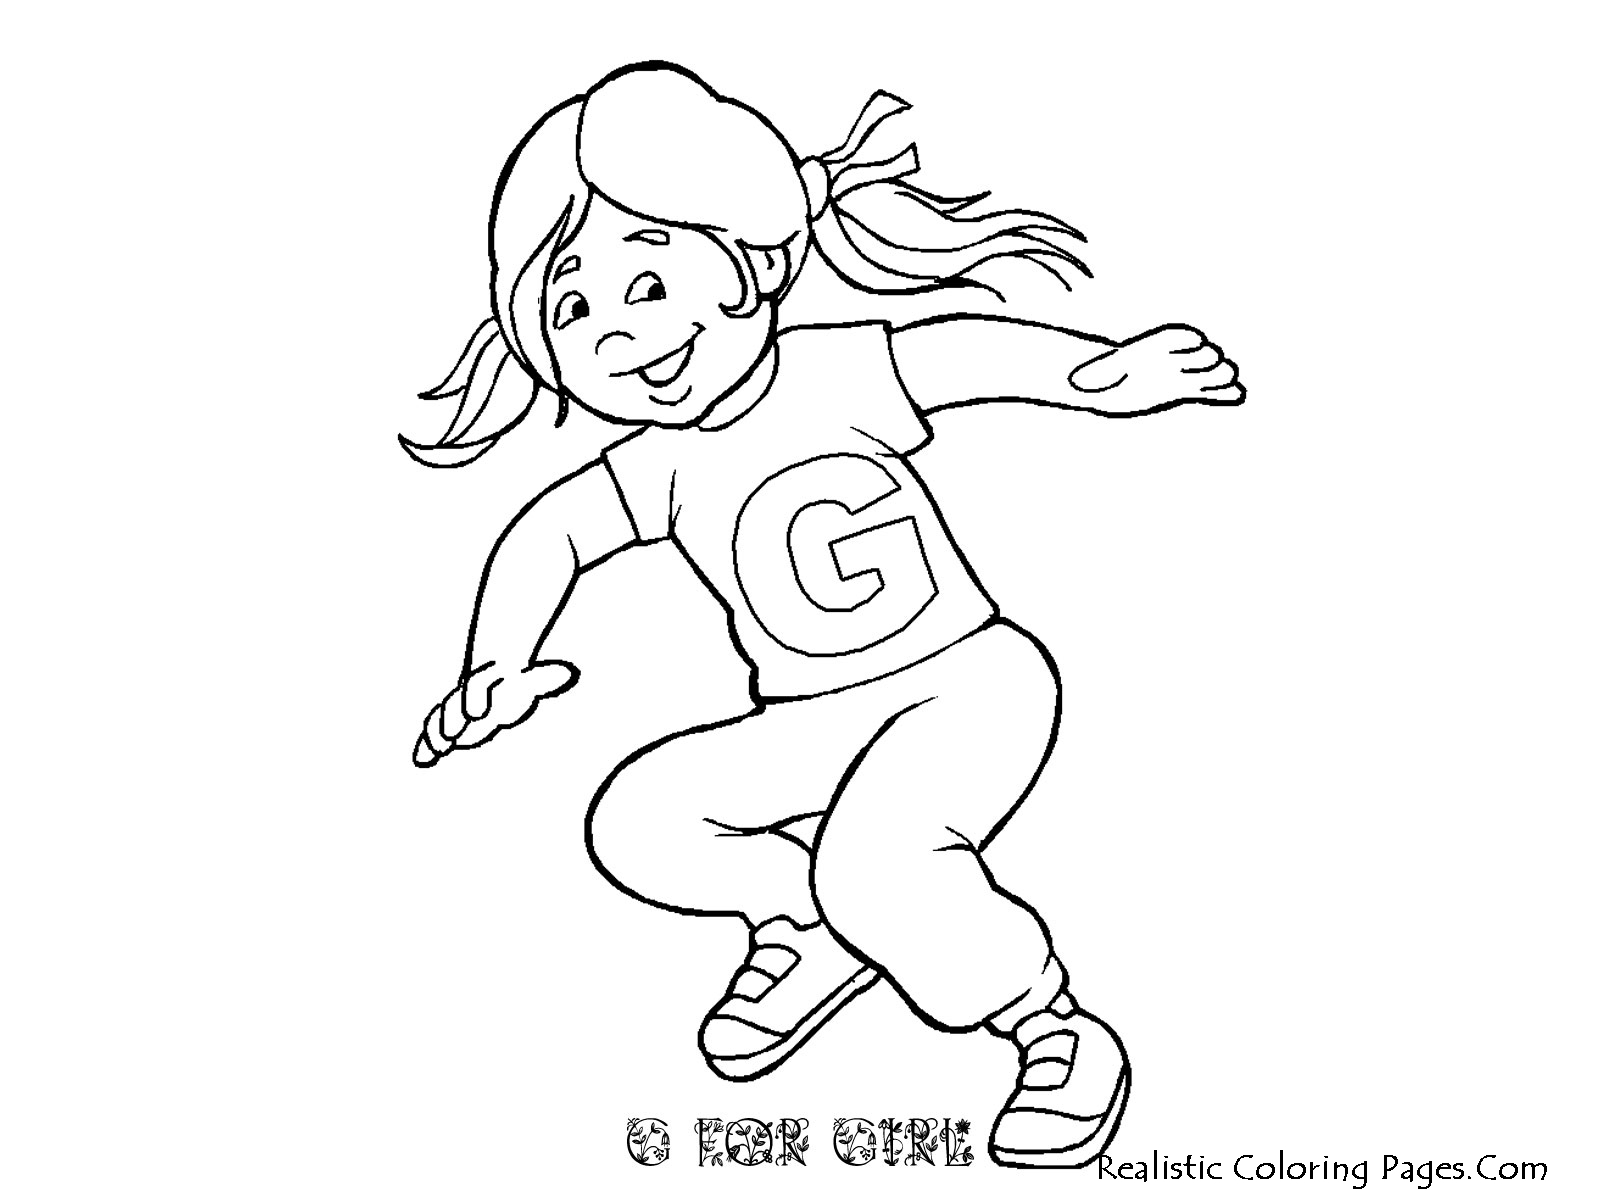 The Letter G Coloring Pages for Girls Image